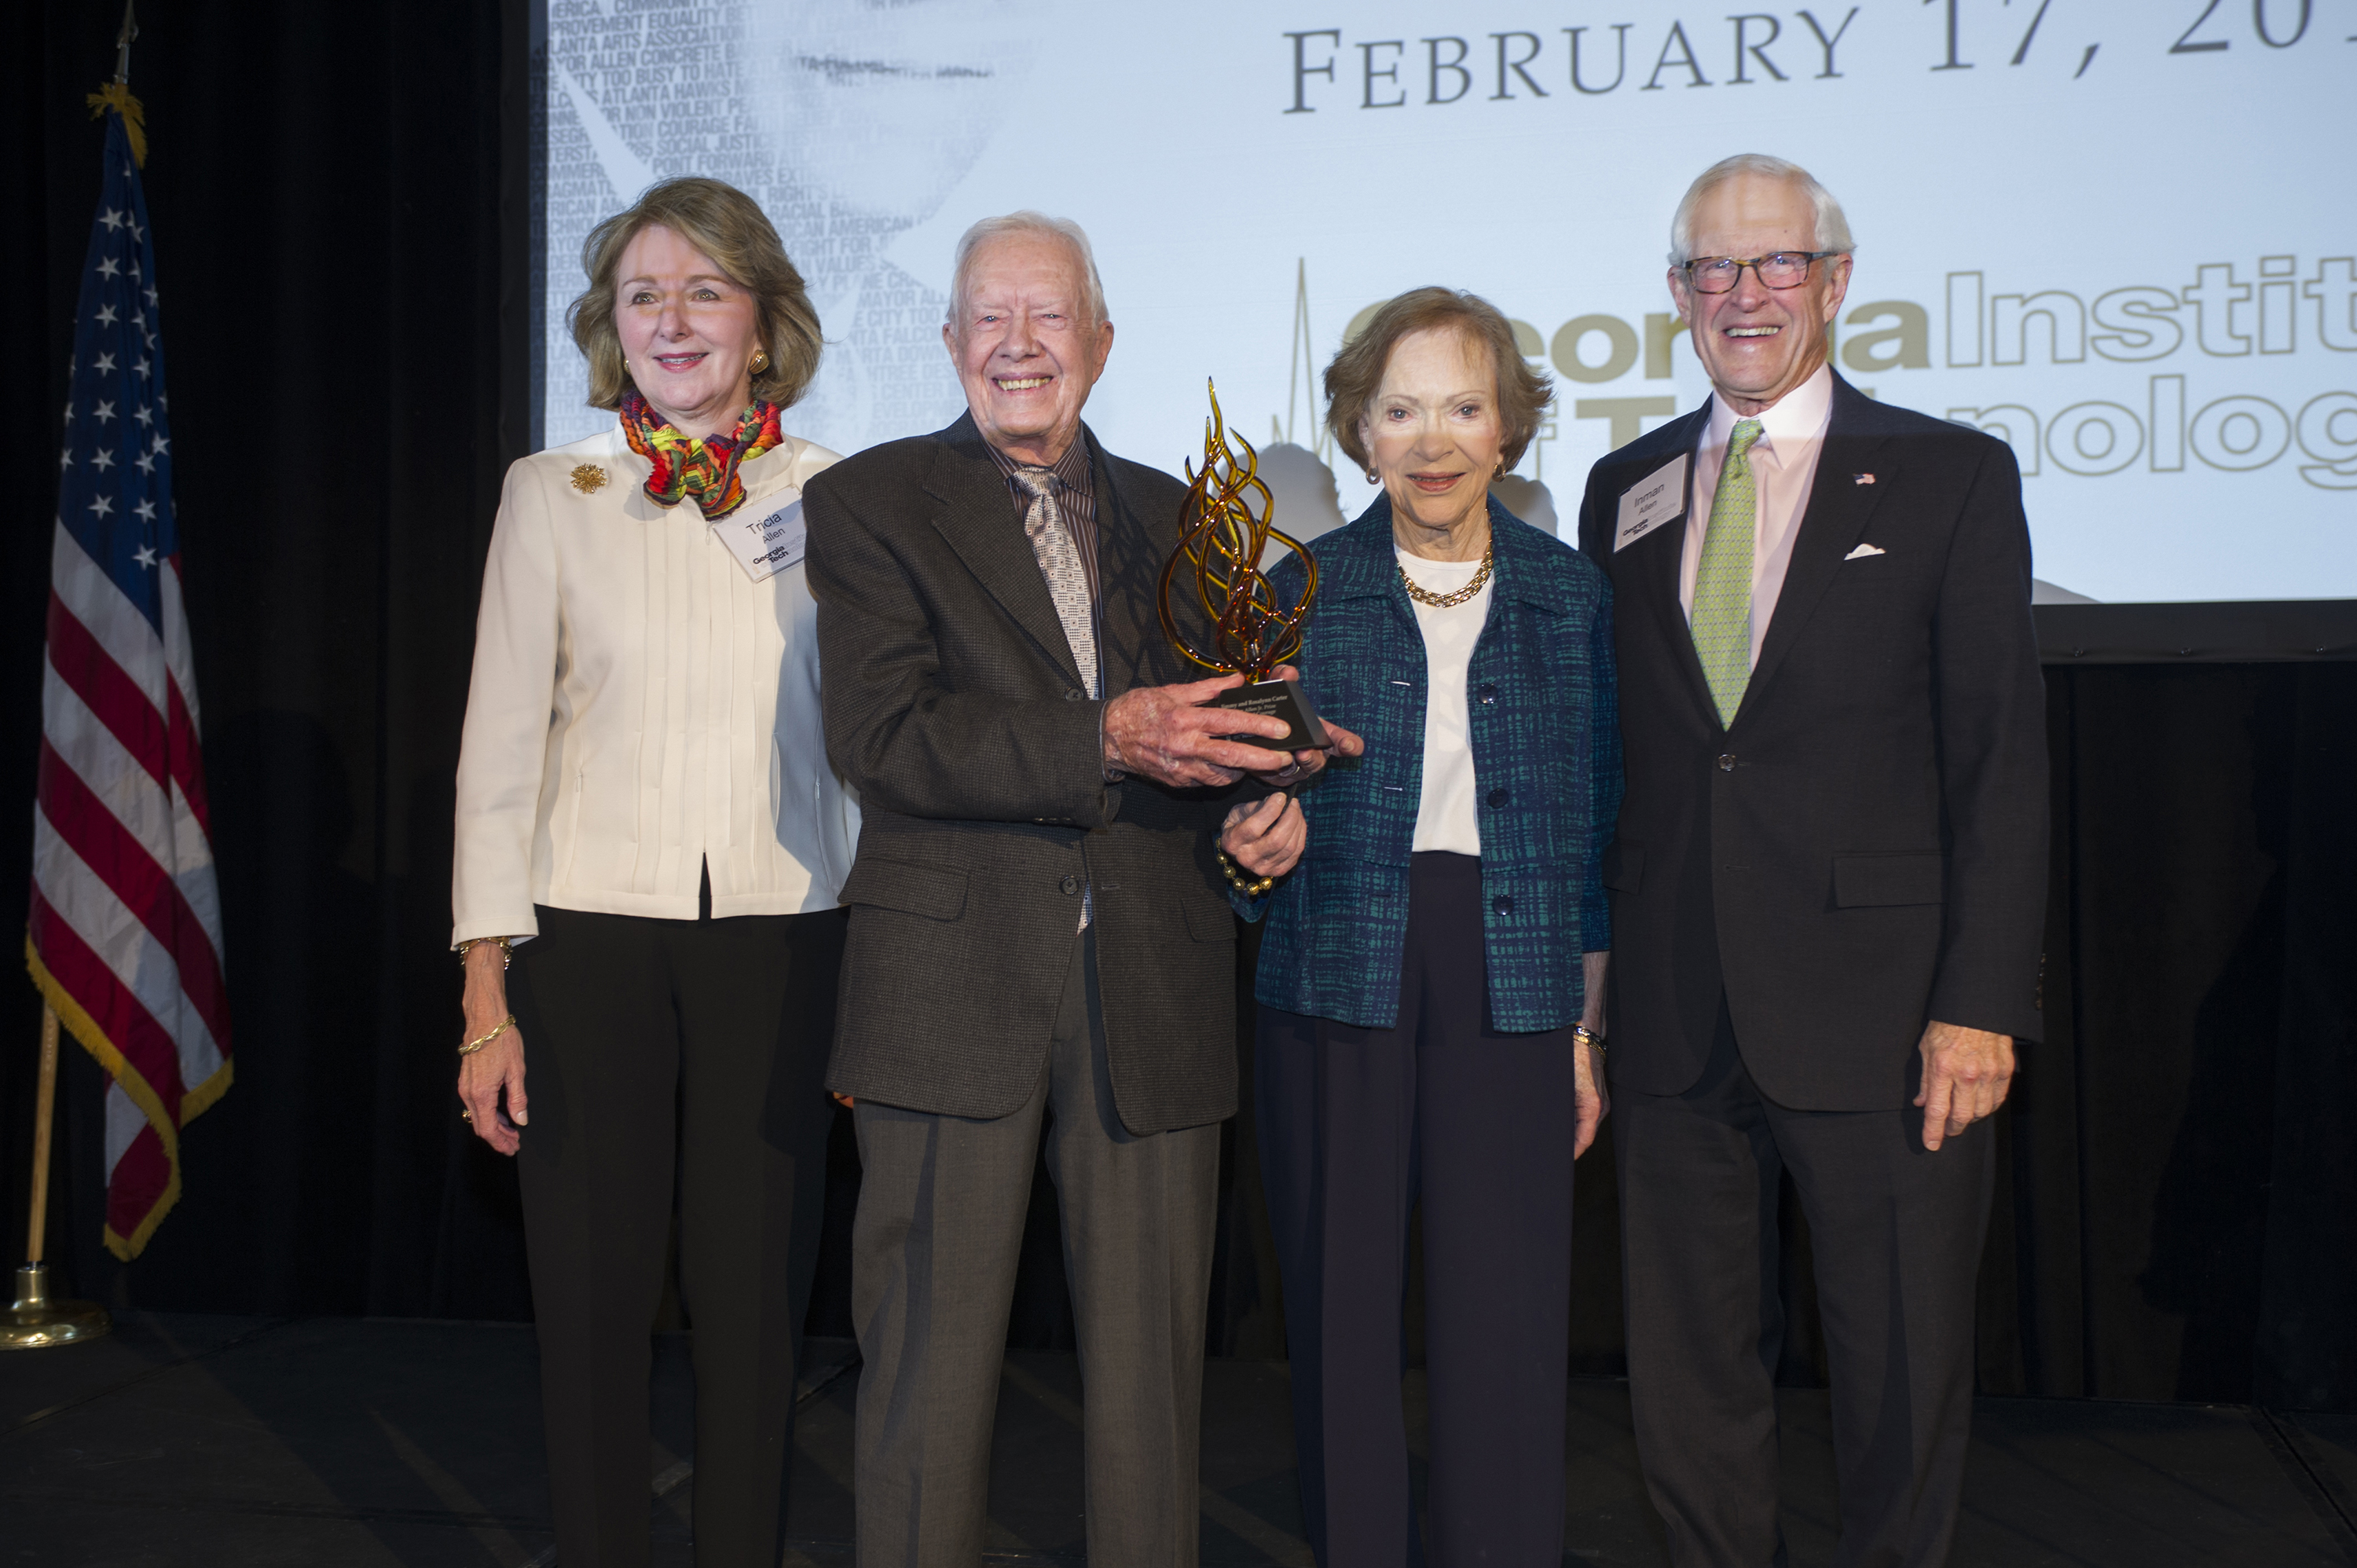 Former president and first lady Jimmy and Rosalynn Carter stand with Ivan Allen Jr.'s son, Inman Allen, right, and daughter-in-law, Tricia Allen, left.